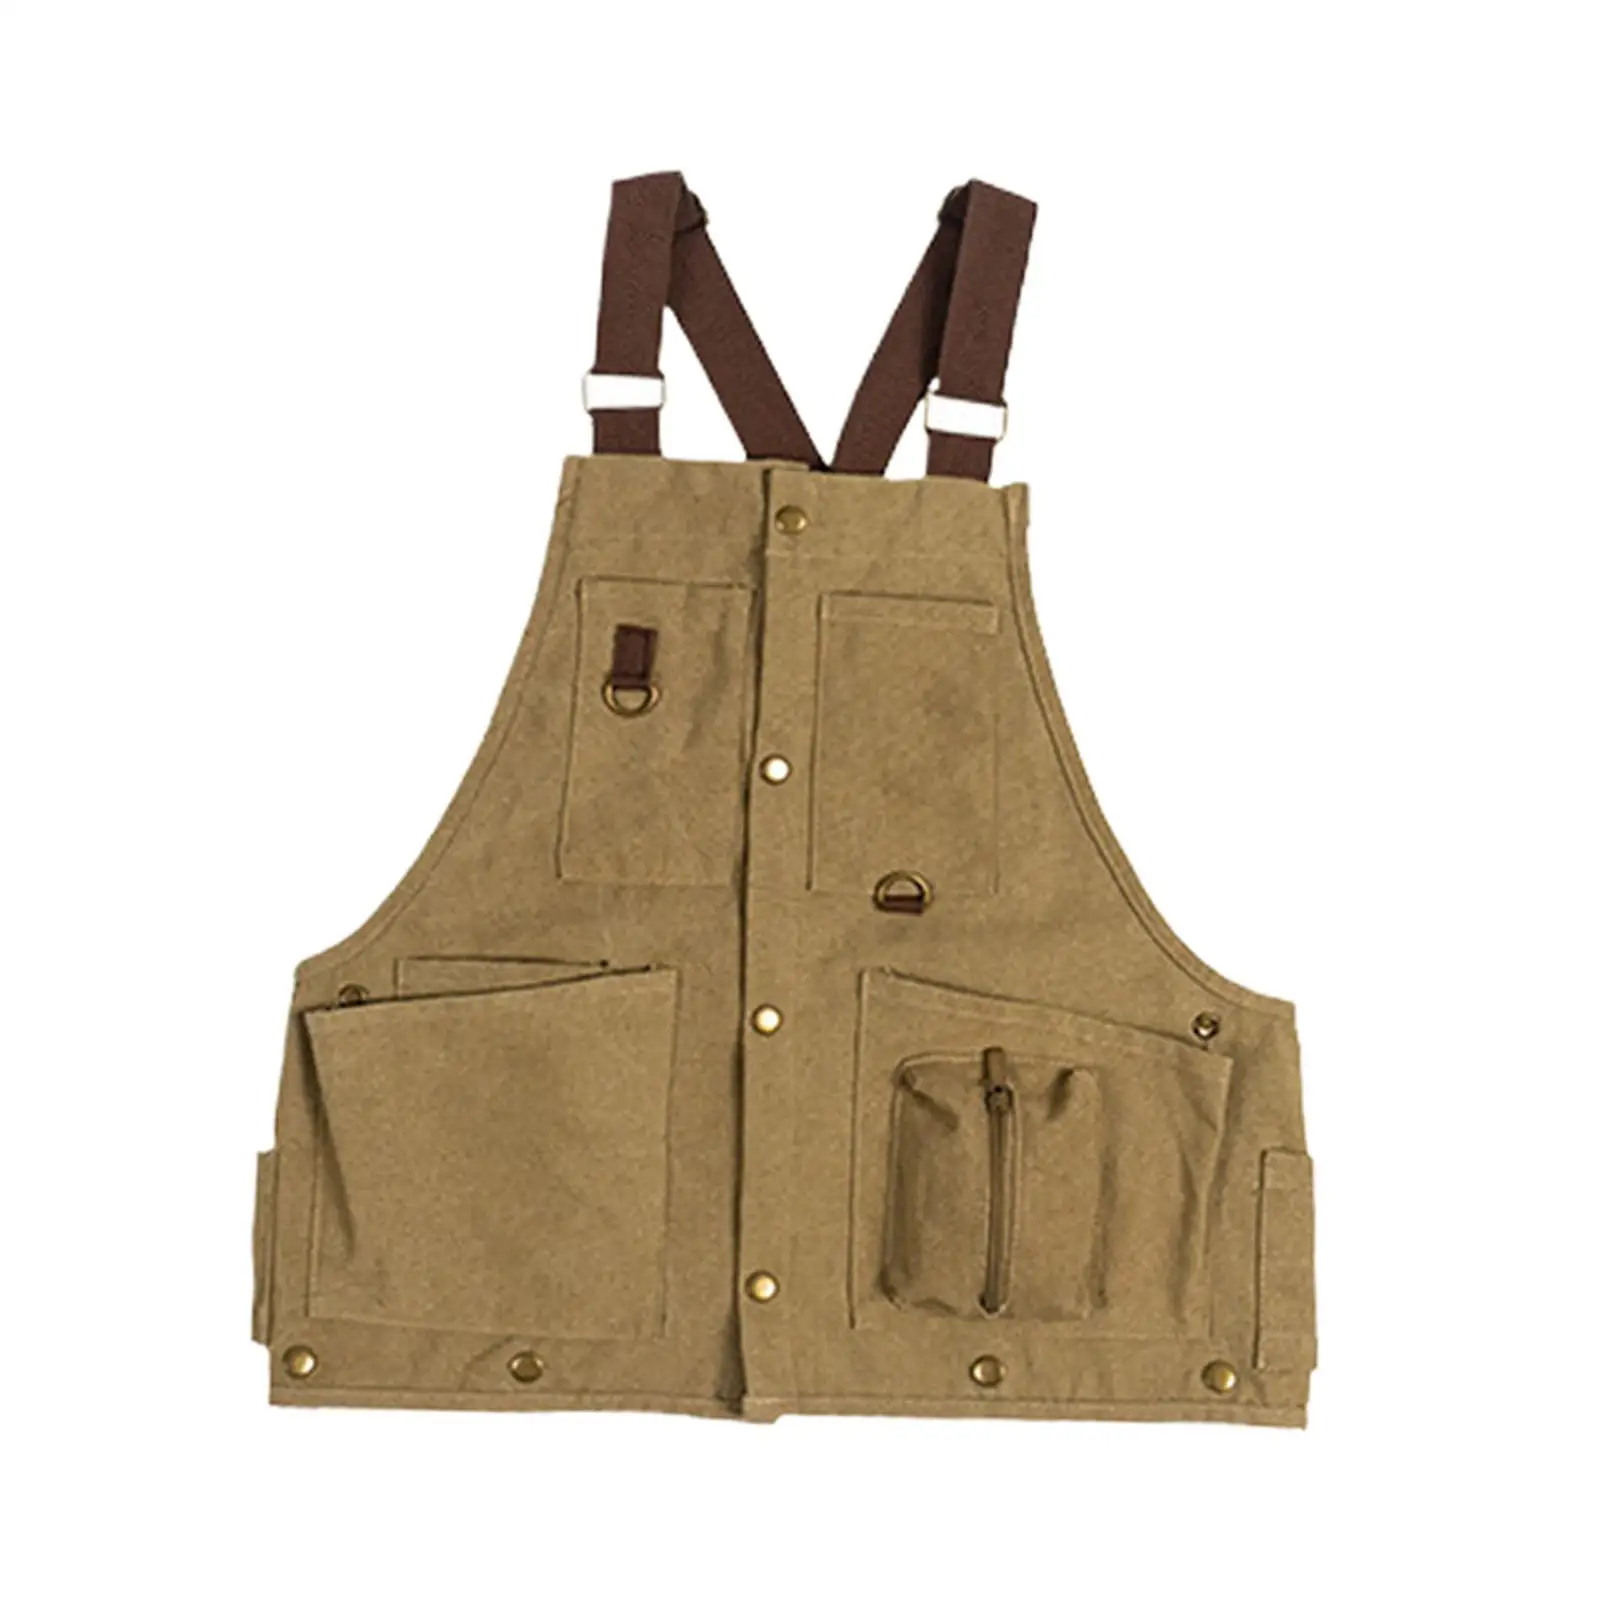 Barbecue Apron Casual Outdoor Camping Vest for Adult Photography Backpacking